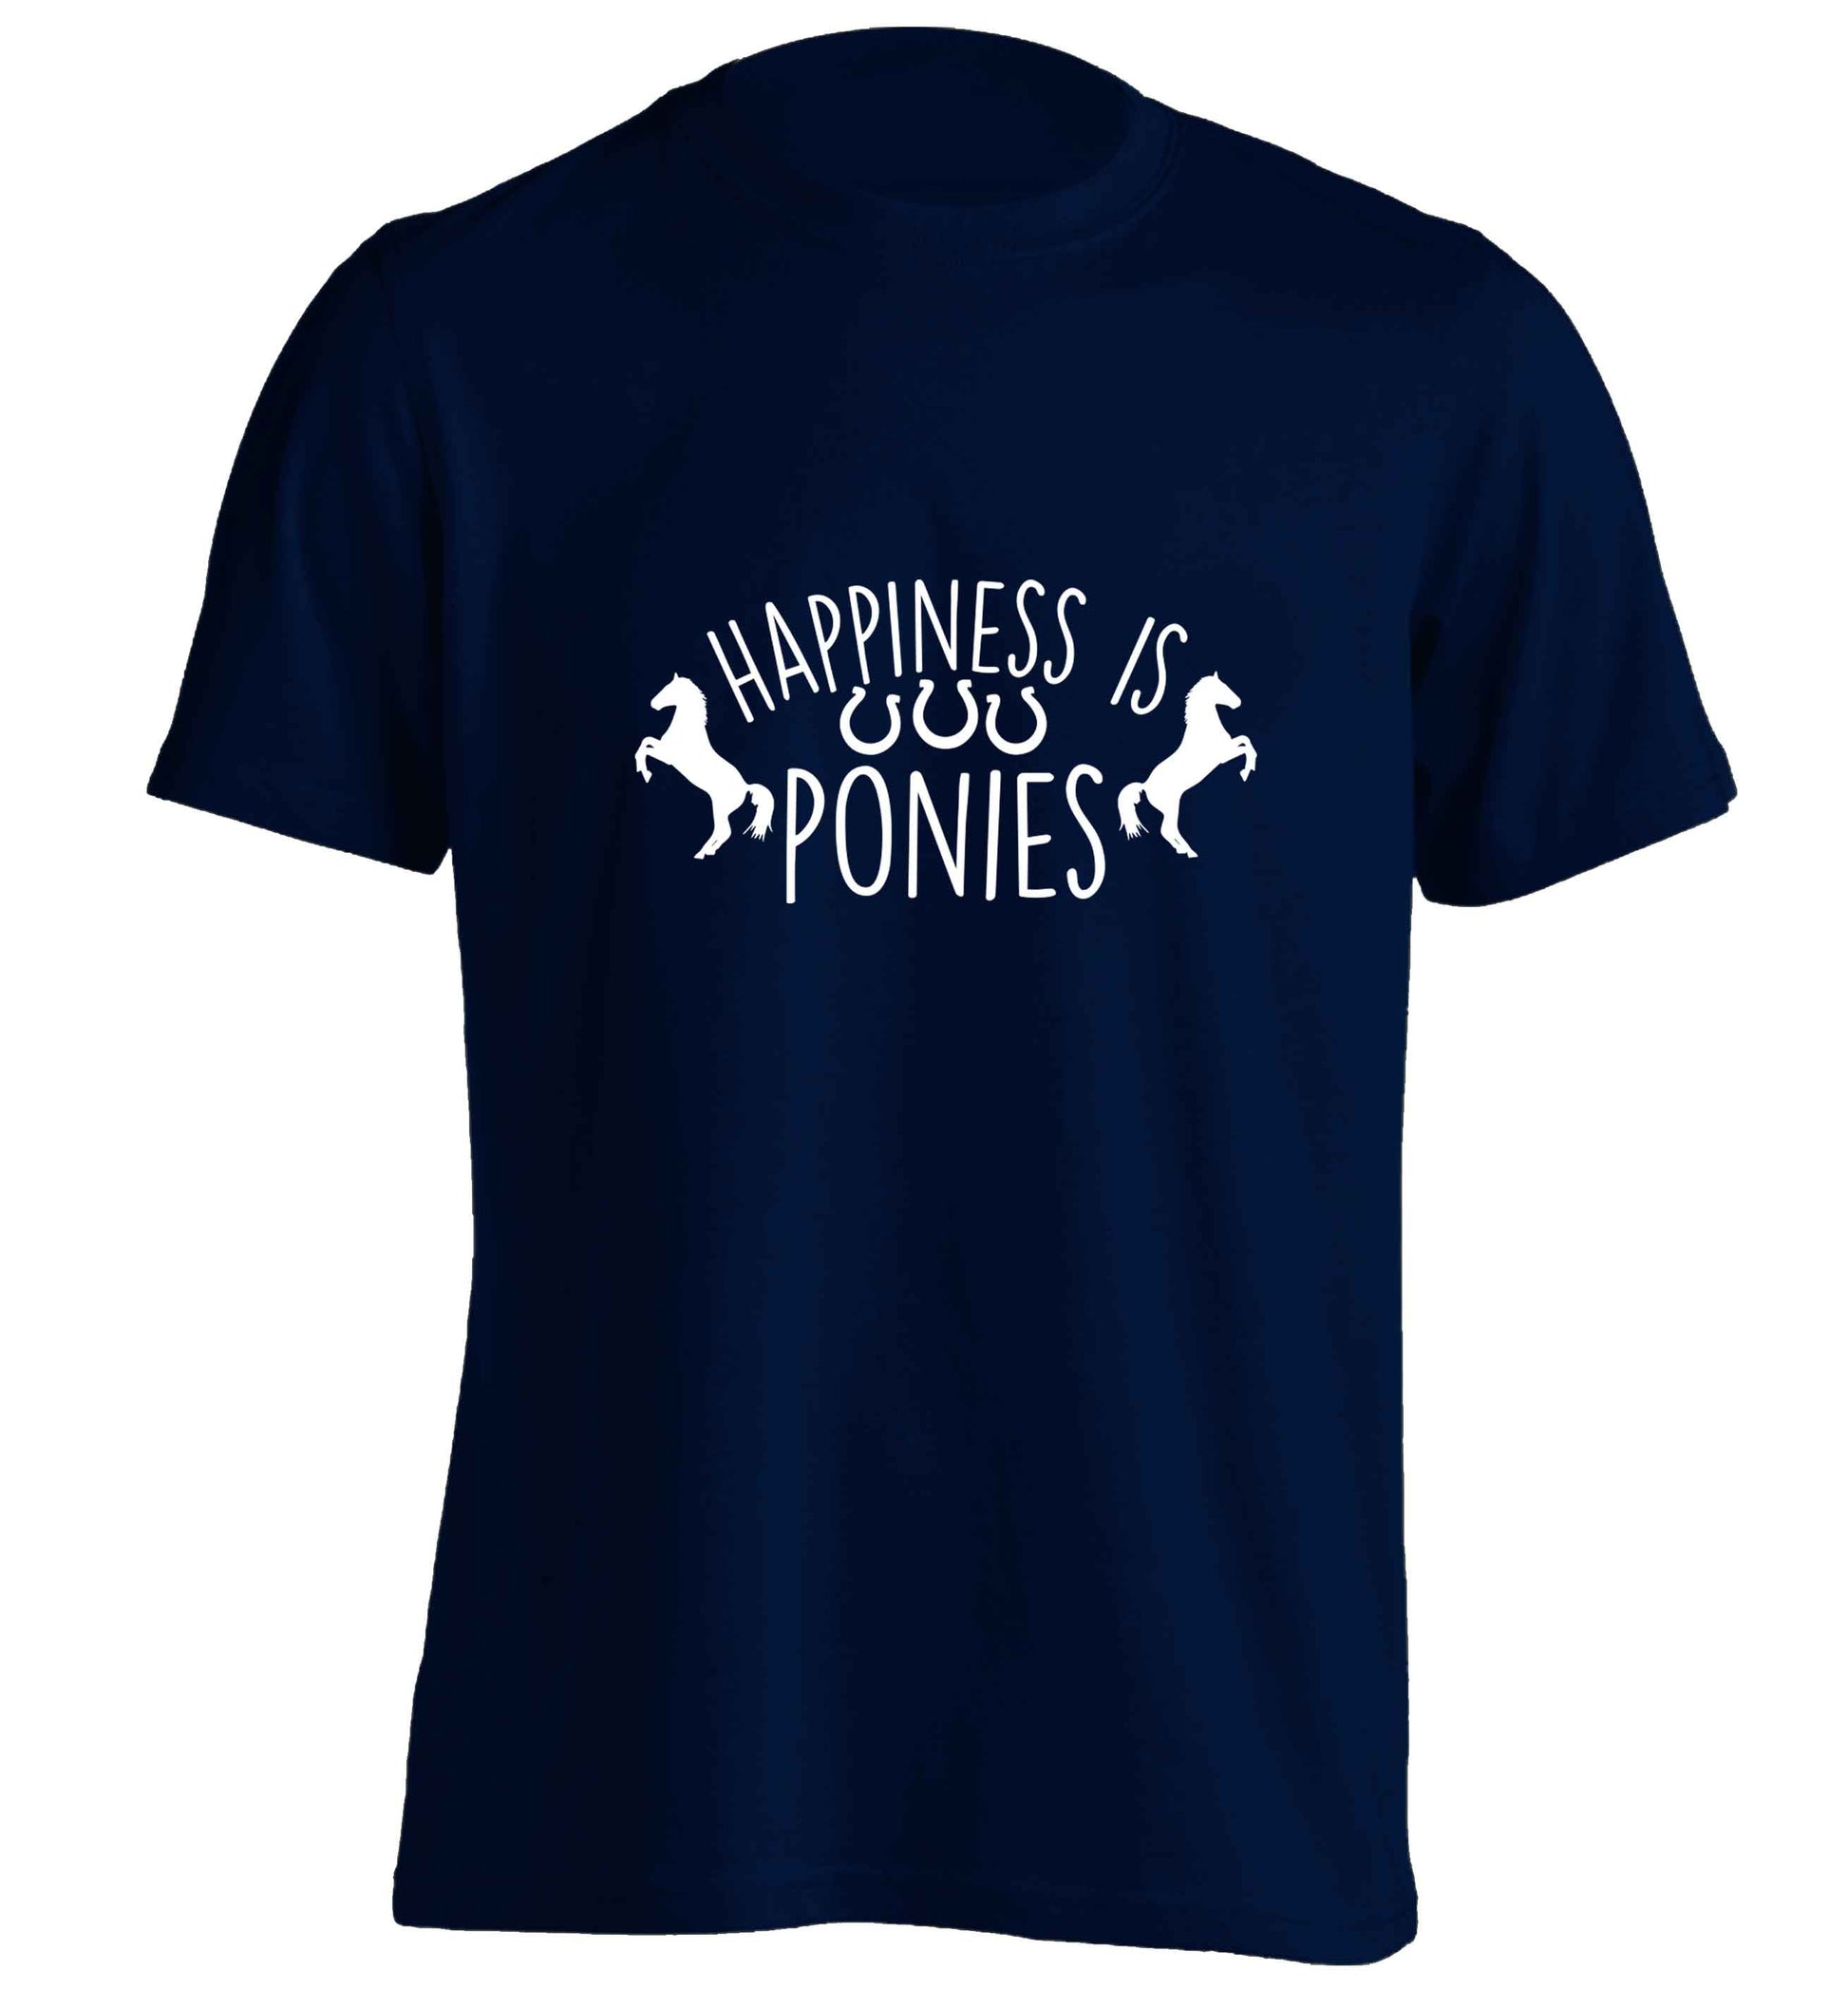 Happiness is ponies adults unisex navy Tshirt 2XL